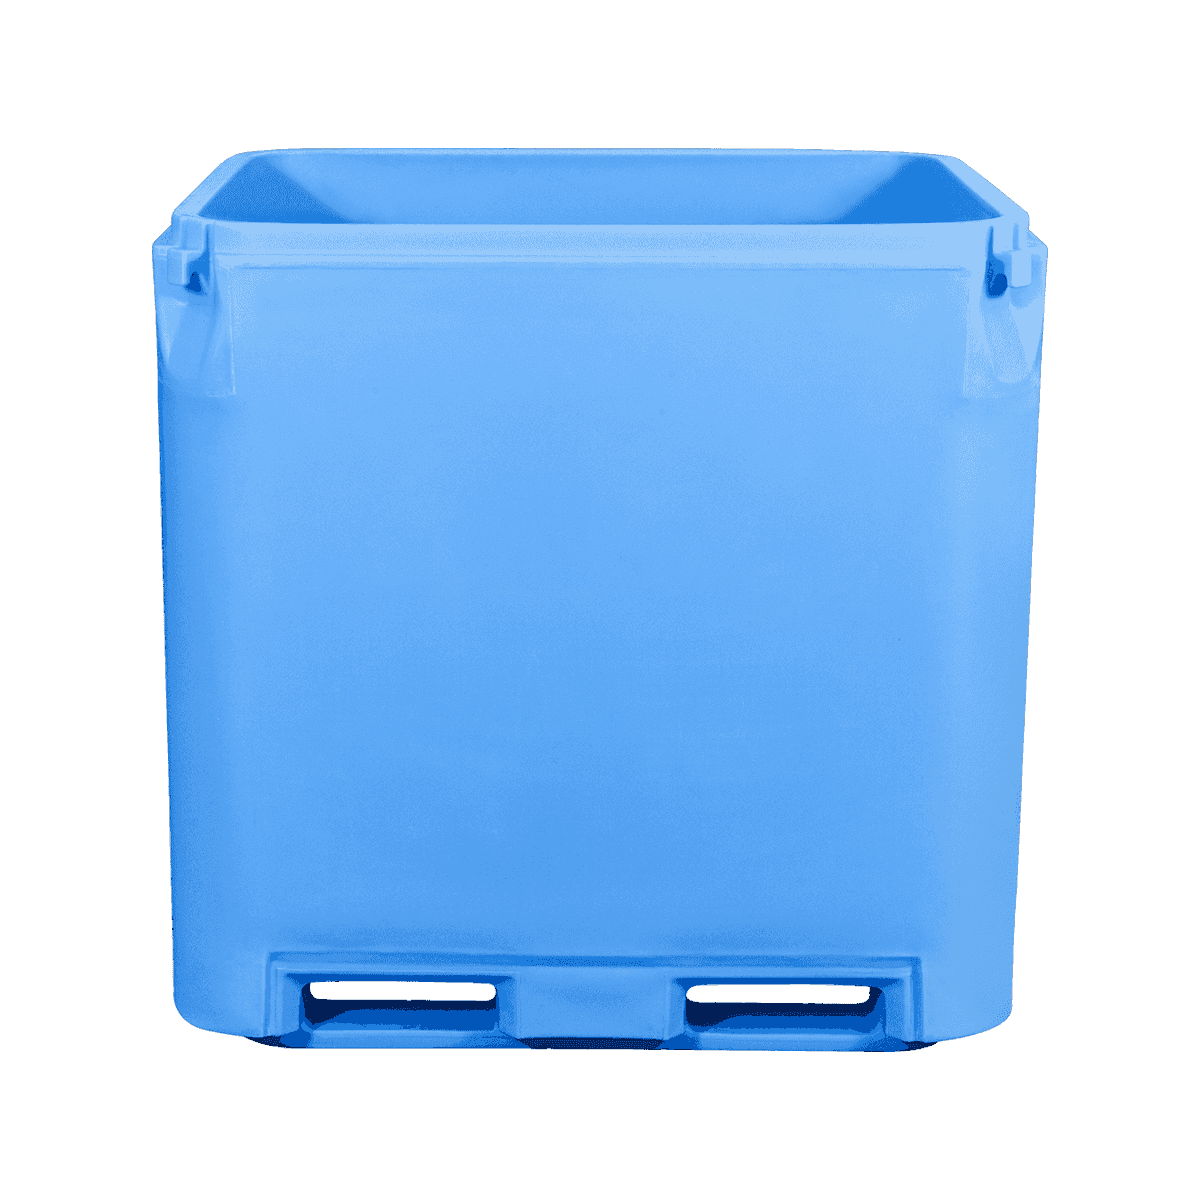 AF-1000L Insulated Fish Totes Seafood Industrial Use Plastic Containers